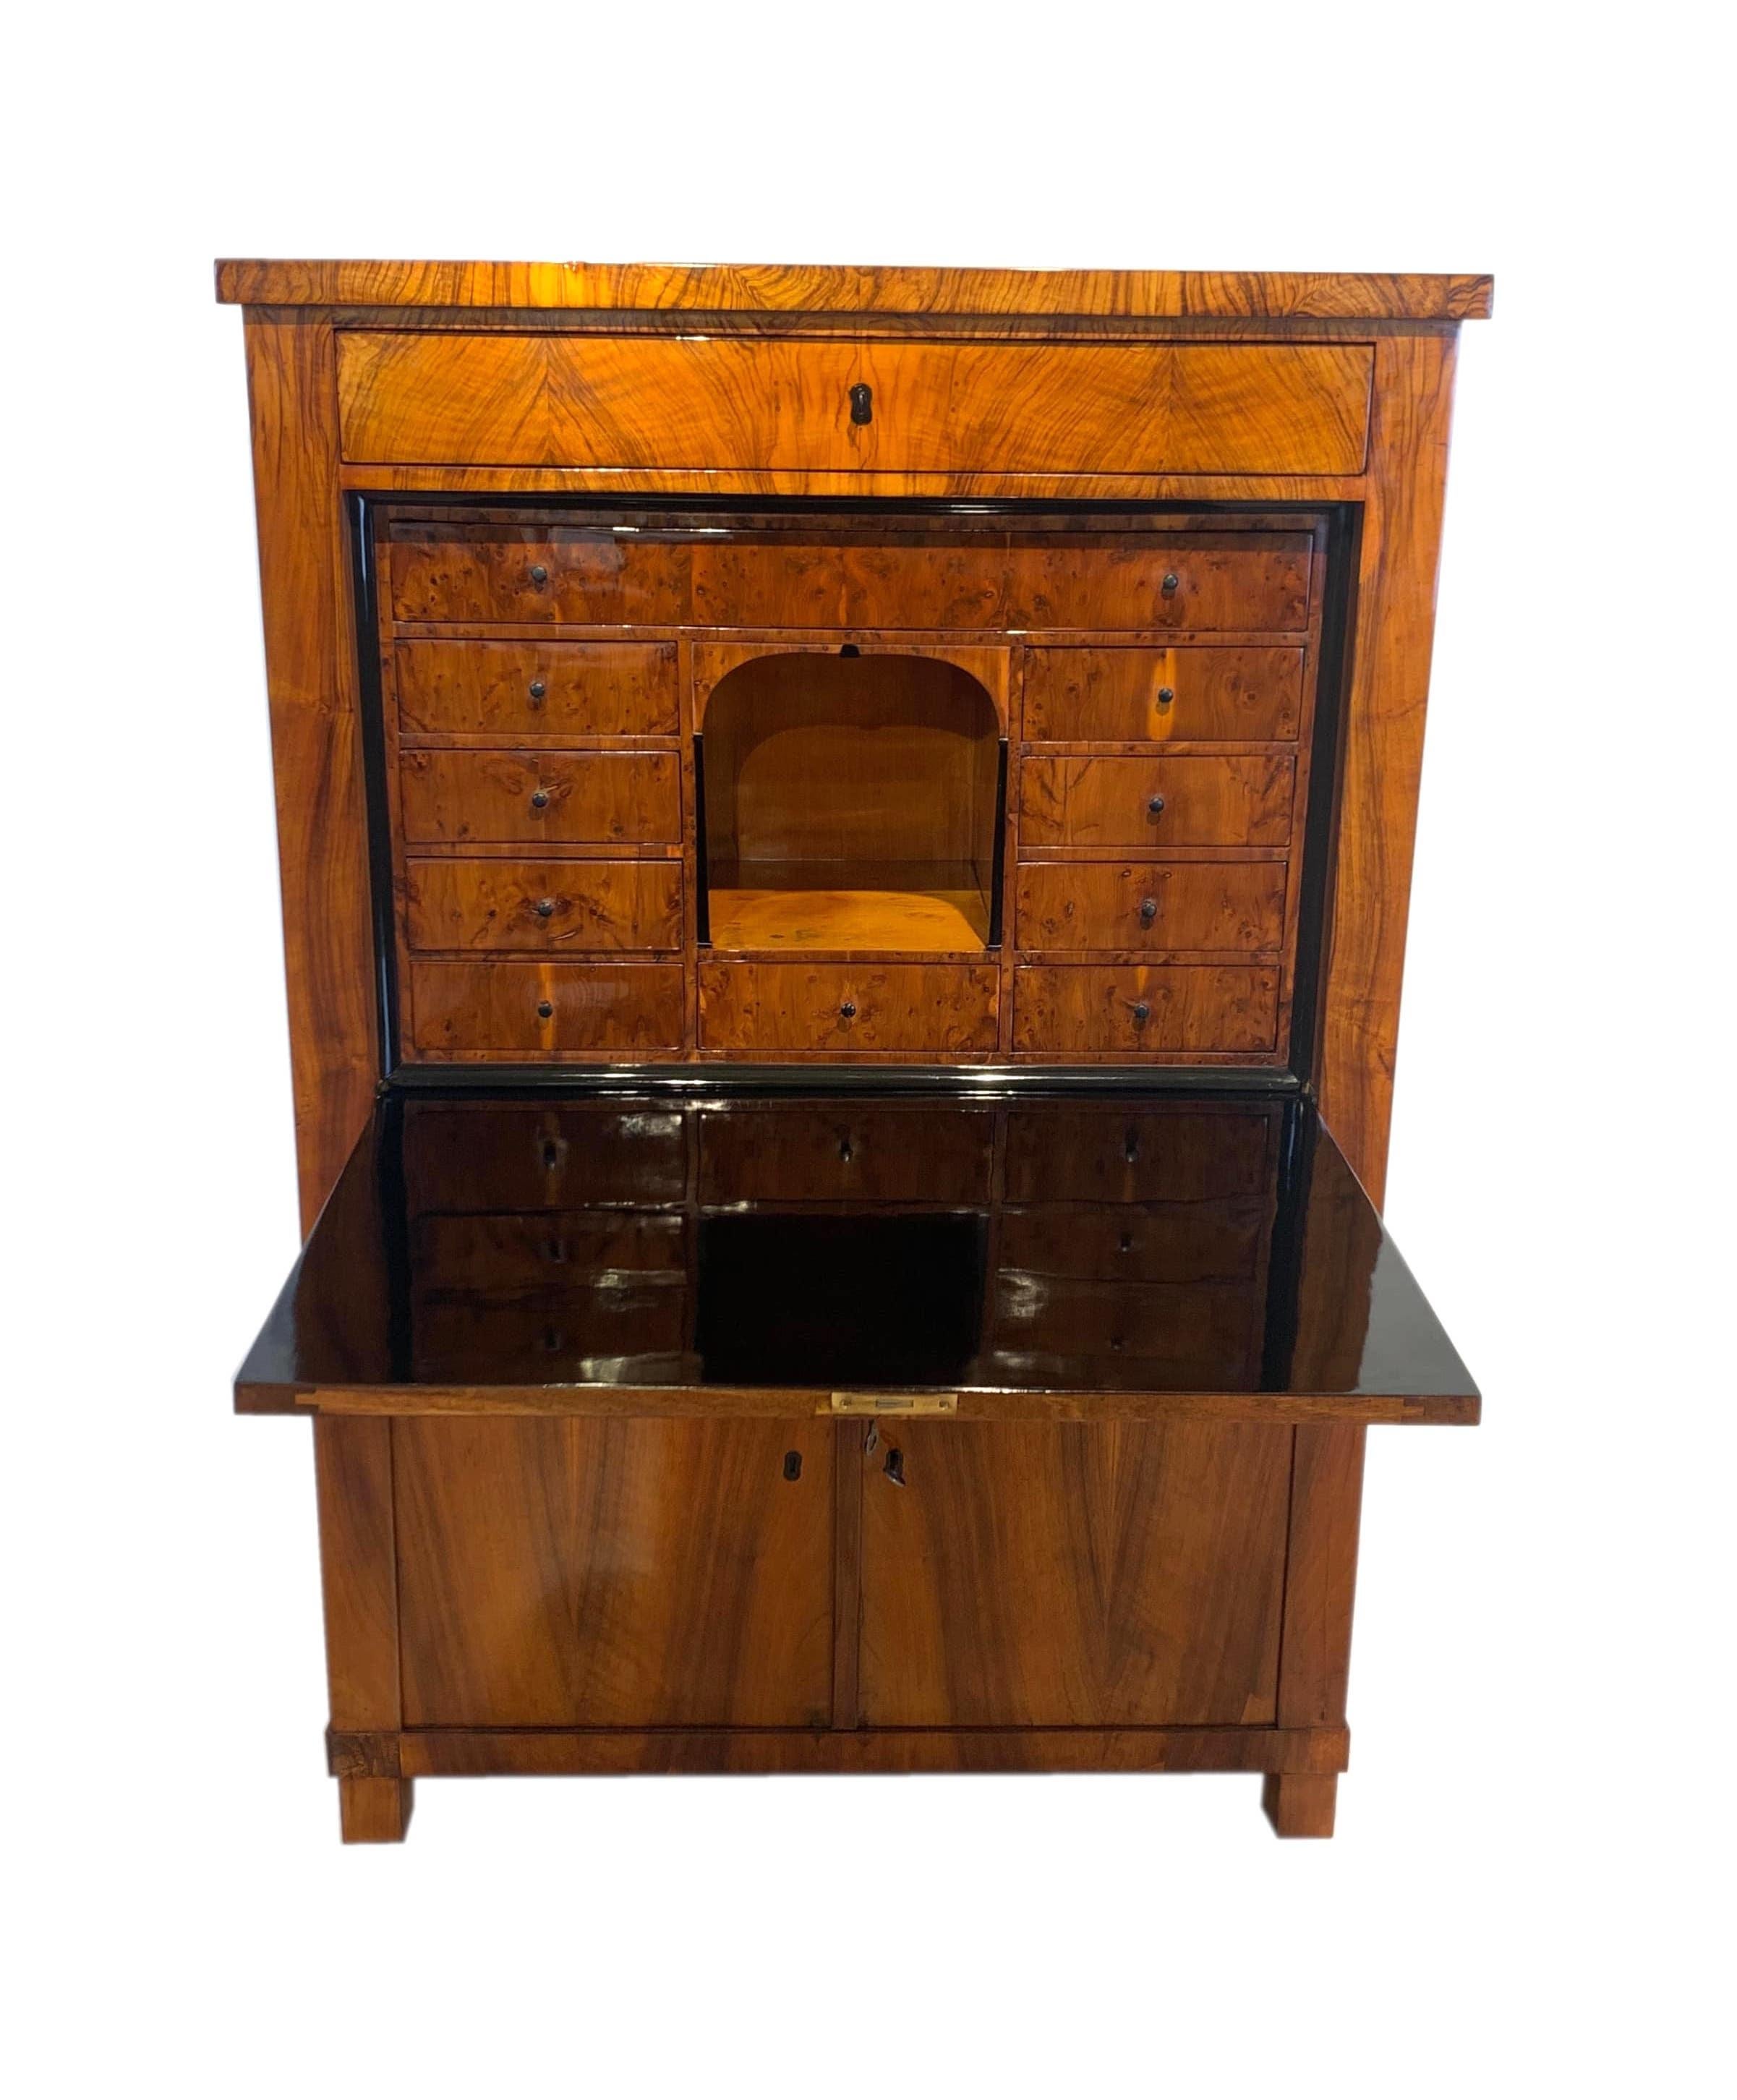 Beautiful straight lined, rectilinear and unadorned neoclassical Biedermeier secrétaire / secretary / writing armoire or desk from Central Germany, circa 1830.

Finely chosen and continuously running and bookmatched walnut veneer. Hand polished